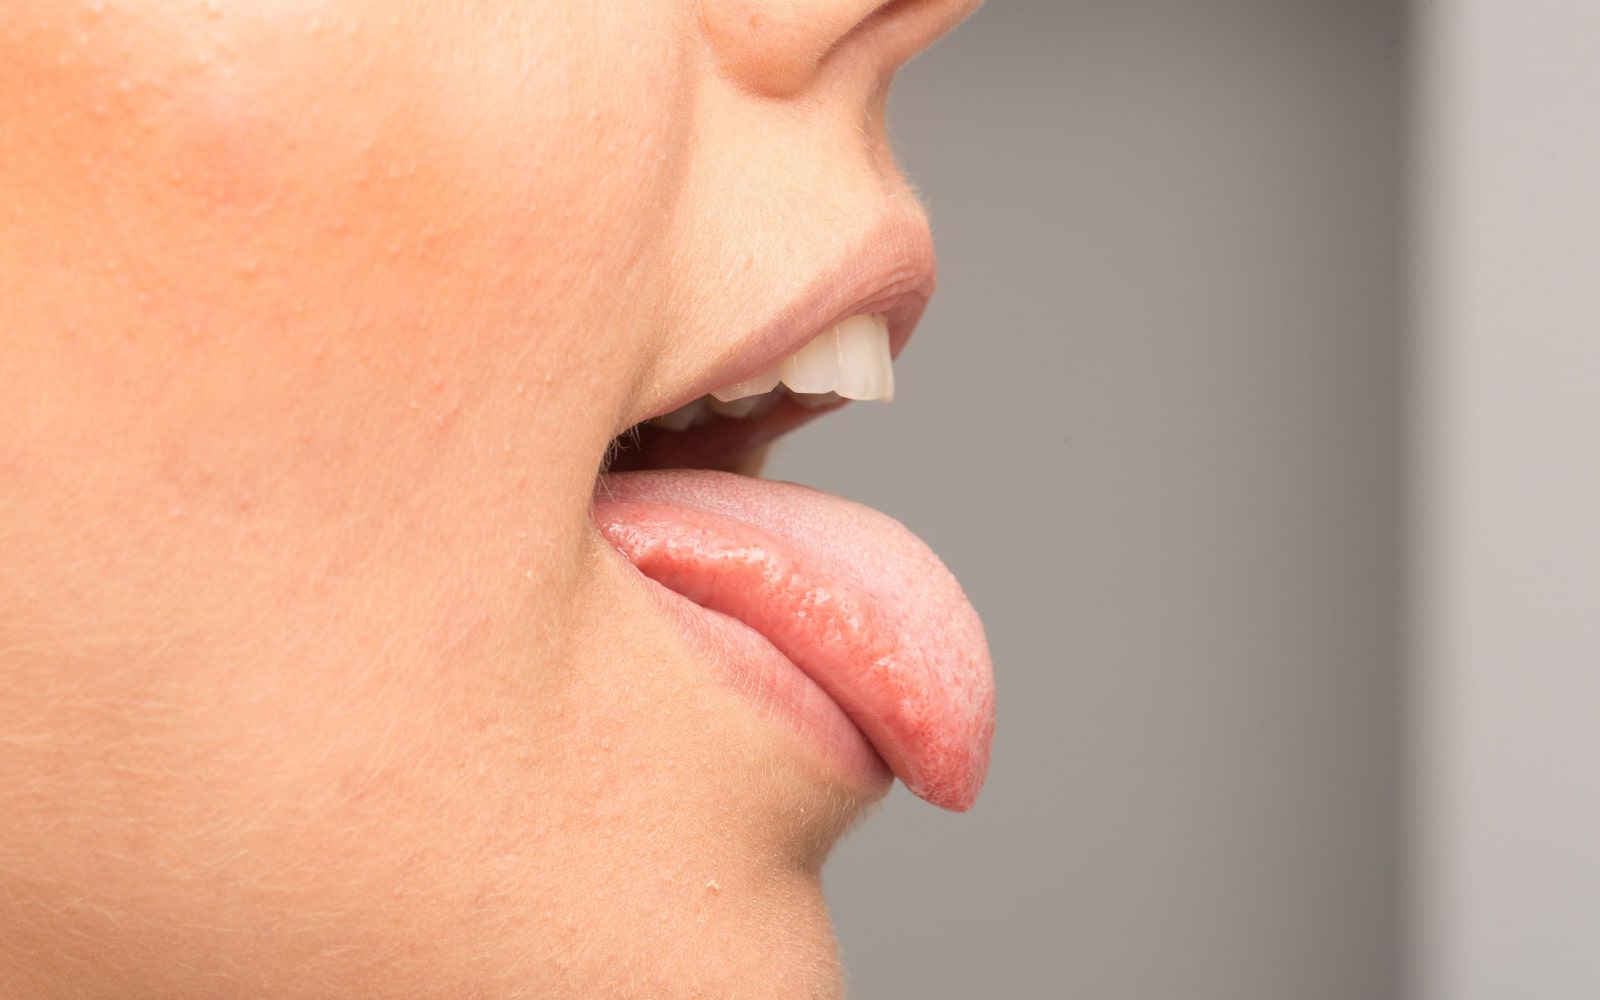 Dry mouth from salivary gland disorder